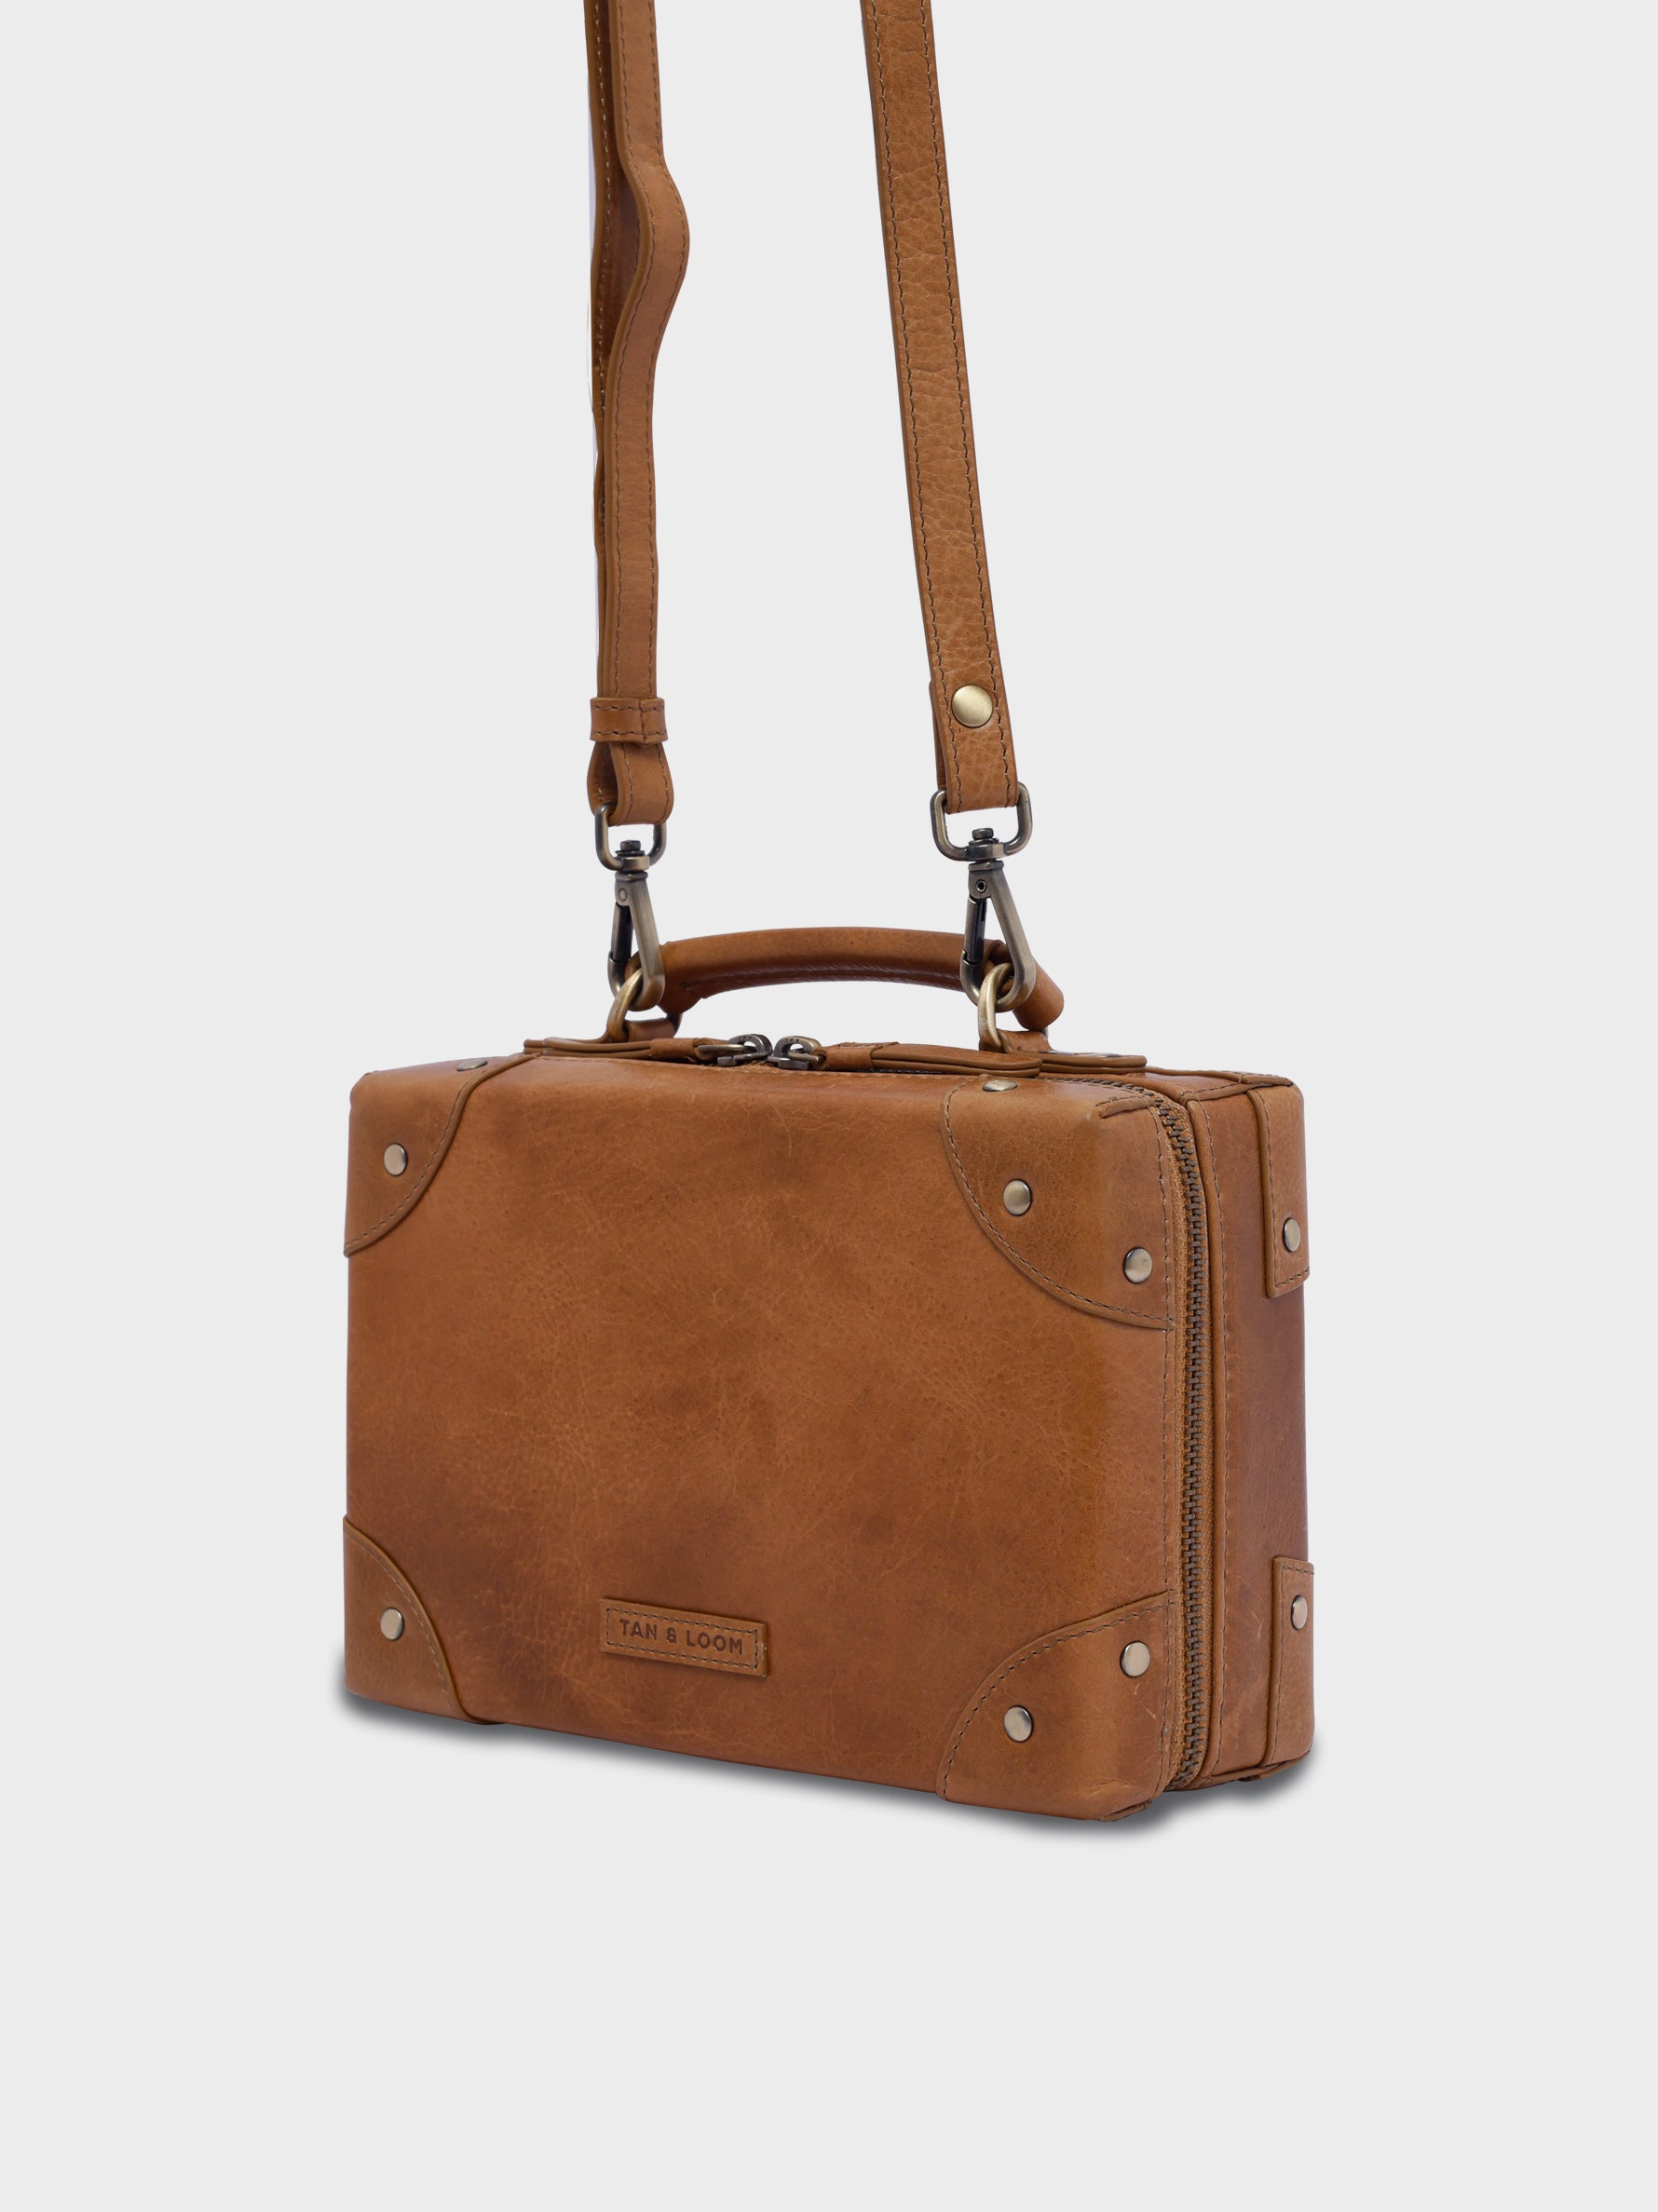 Handcrafted Genuine Vegetable Tanned Leather Traveller's Trunk Mini Sling Tuscany Tan for Women Tan & Loom